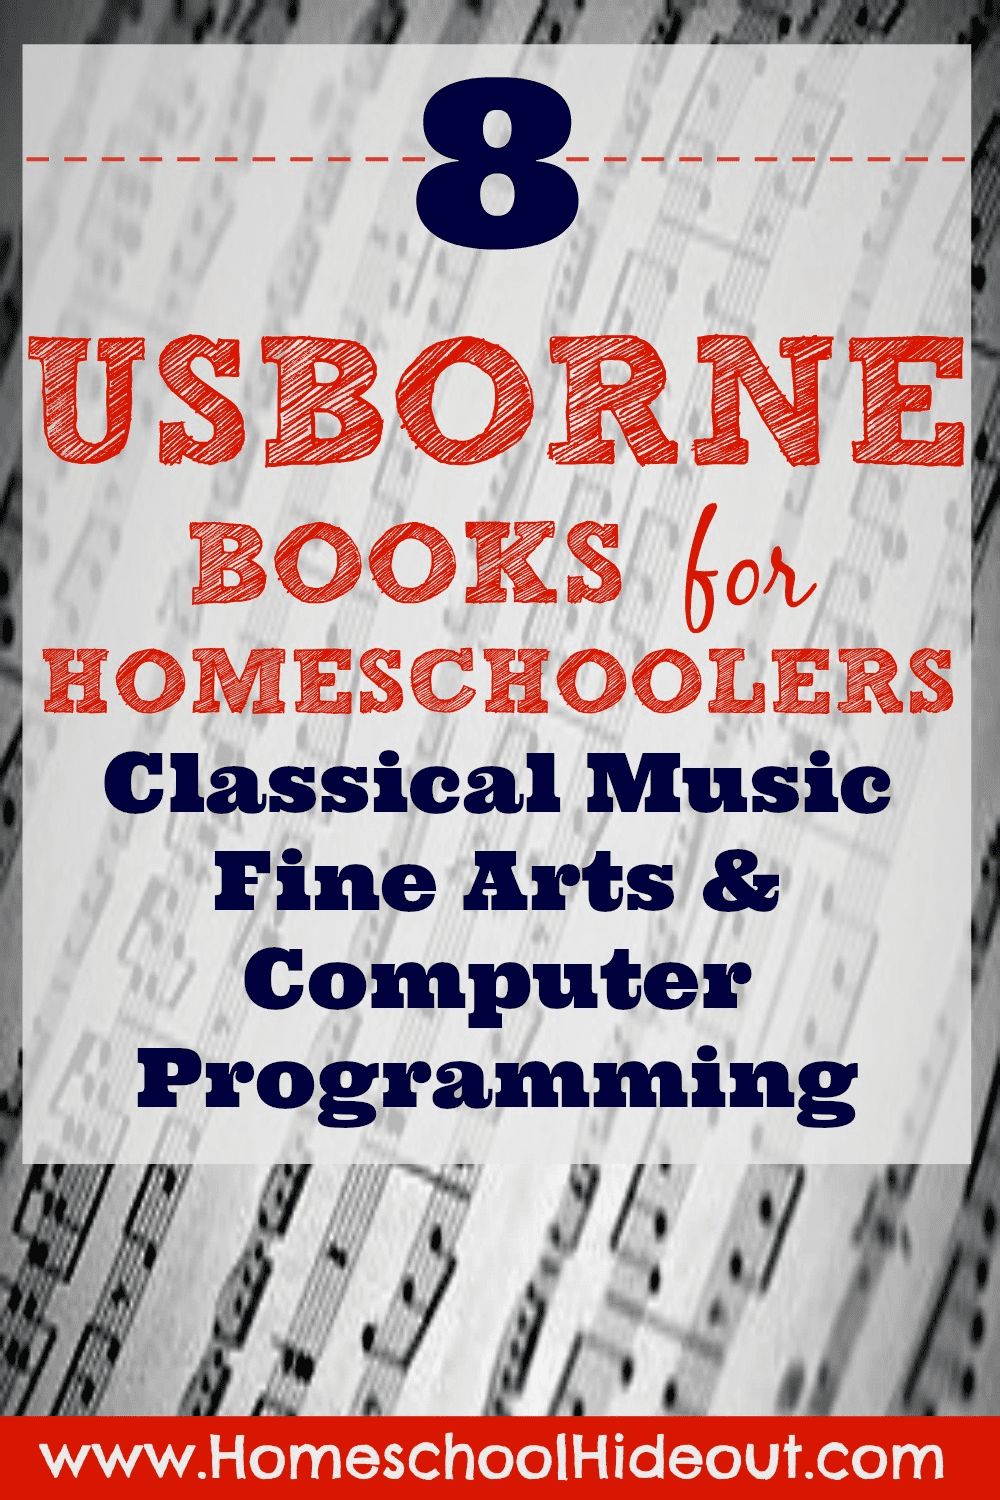 I am just LOVIING this list of Usborne books for homeschoolers! It's got the hard subjects covered: art, music and computer. SO many great resources.